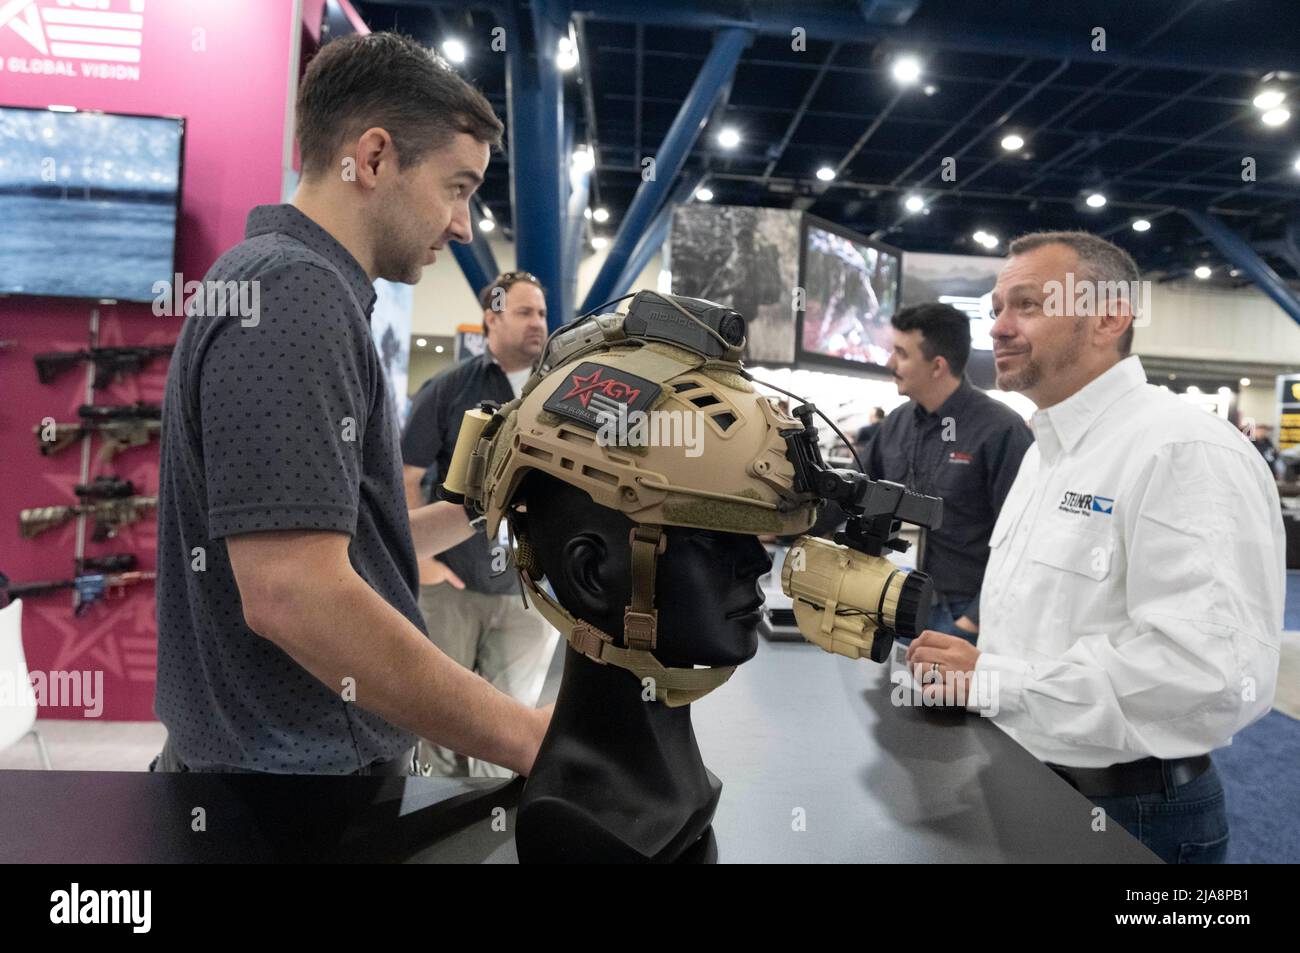 Houston, Texas United States, 28th May 2022: Gun enthusiast talks with a salesperson at the AGM booth on Saturday morning at the National Rifle Association's (NRA) trade show. The exhibits cover almost 14 acres inside the George R. Brown Convention Center. Credit: Bob Daemmrich/Alamy Live News Stock Photo